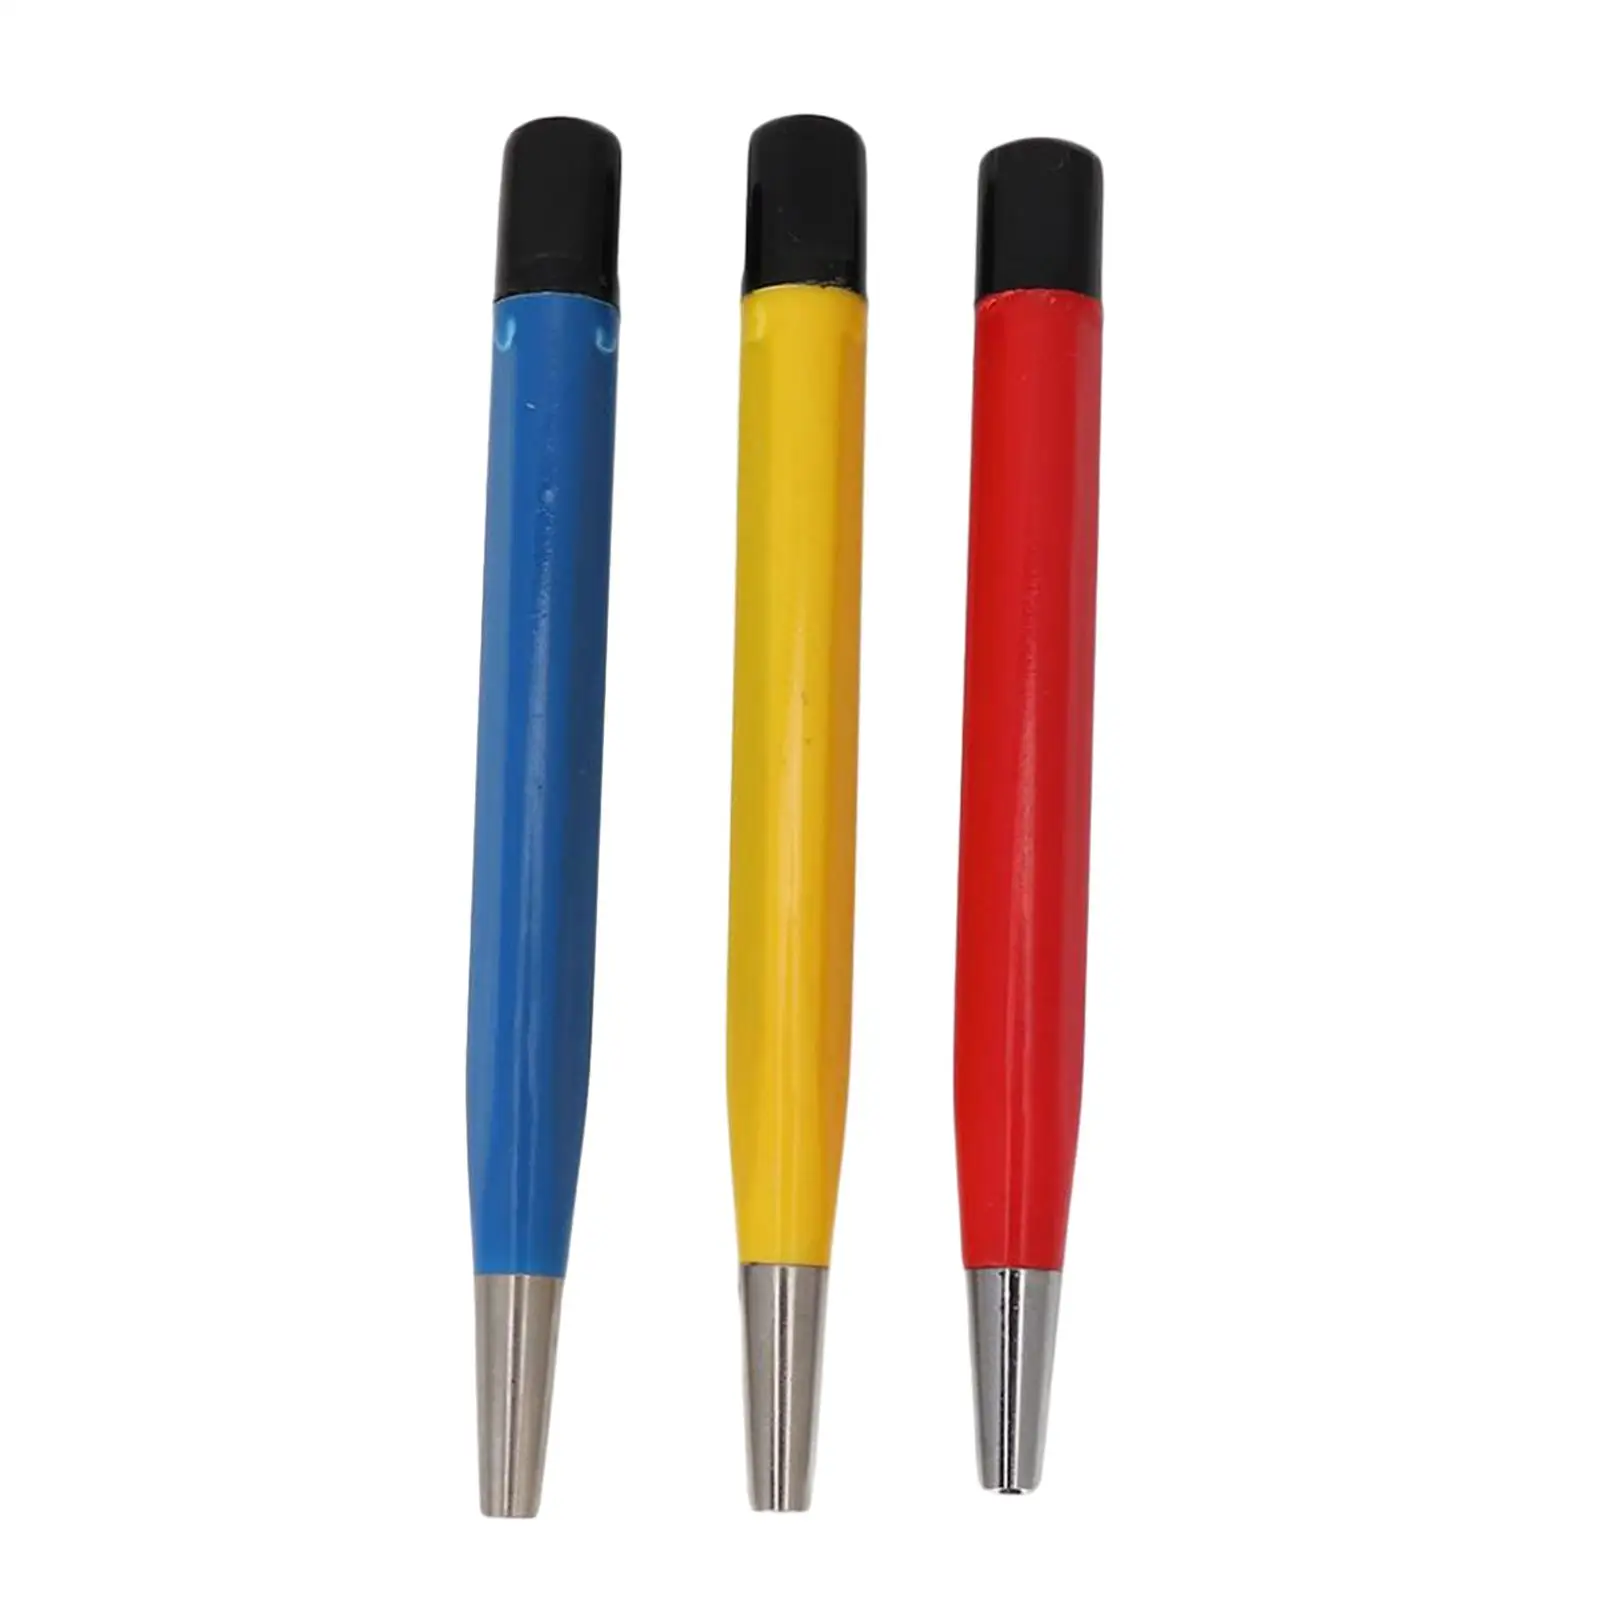 3x Scratch Brush Pen Set Rust Remove Cleaning Tool Watch Maintenance Rust Remover Sanding Brush for Electrical Circuit Boards